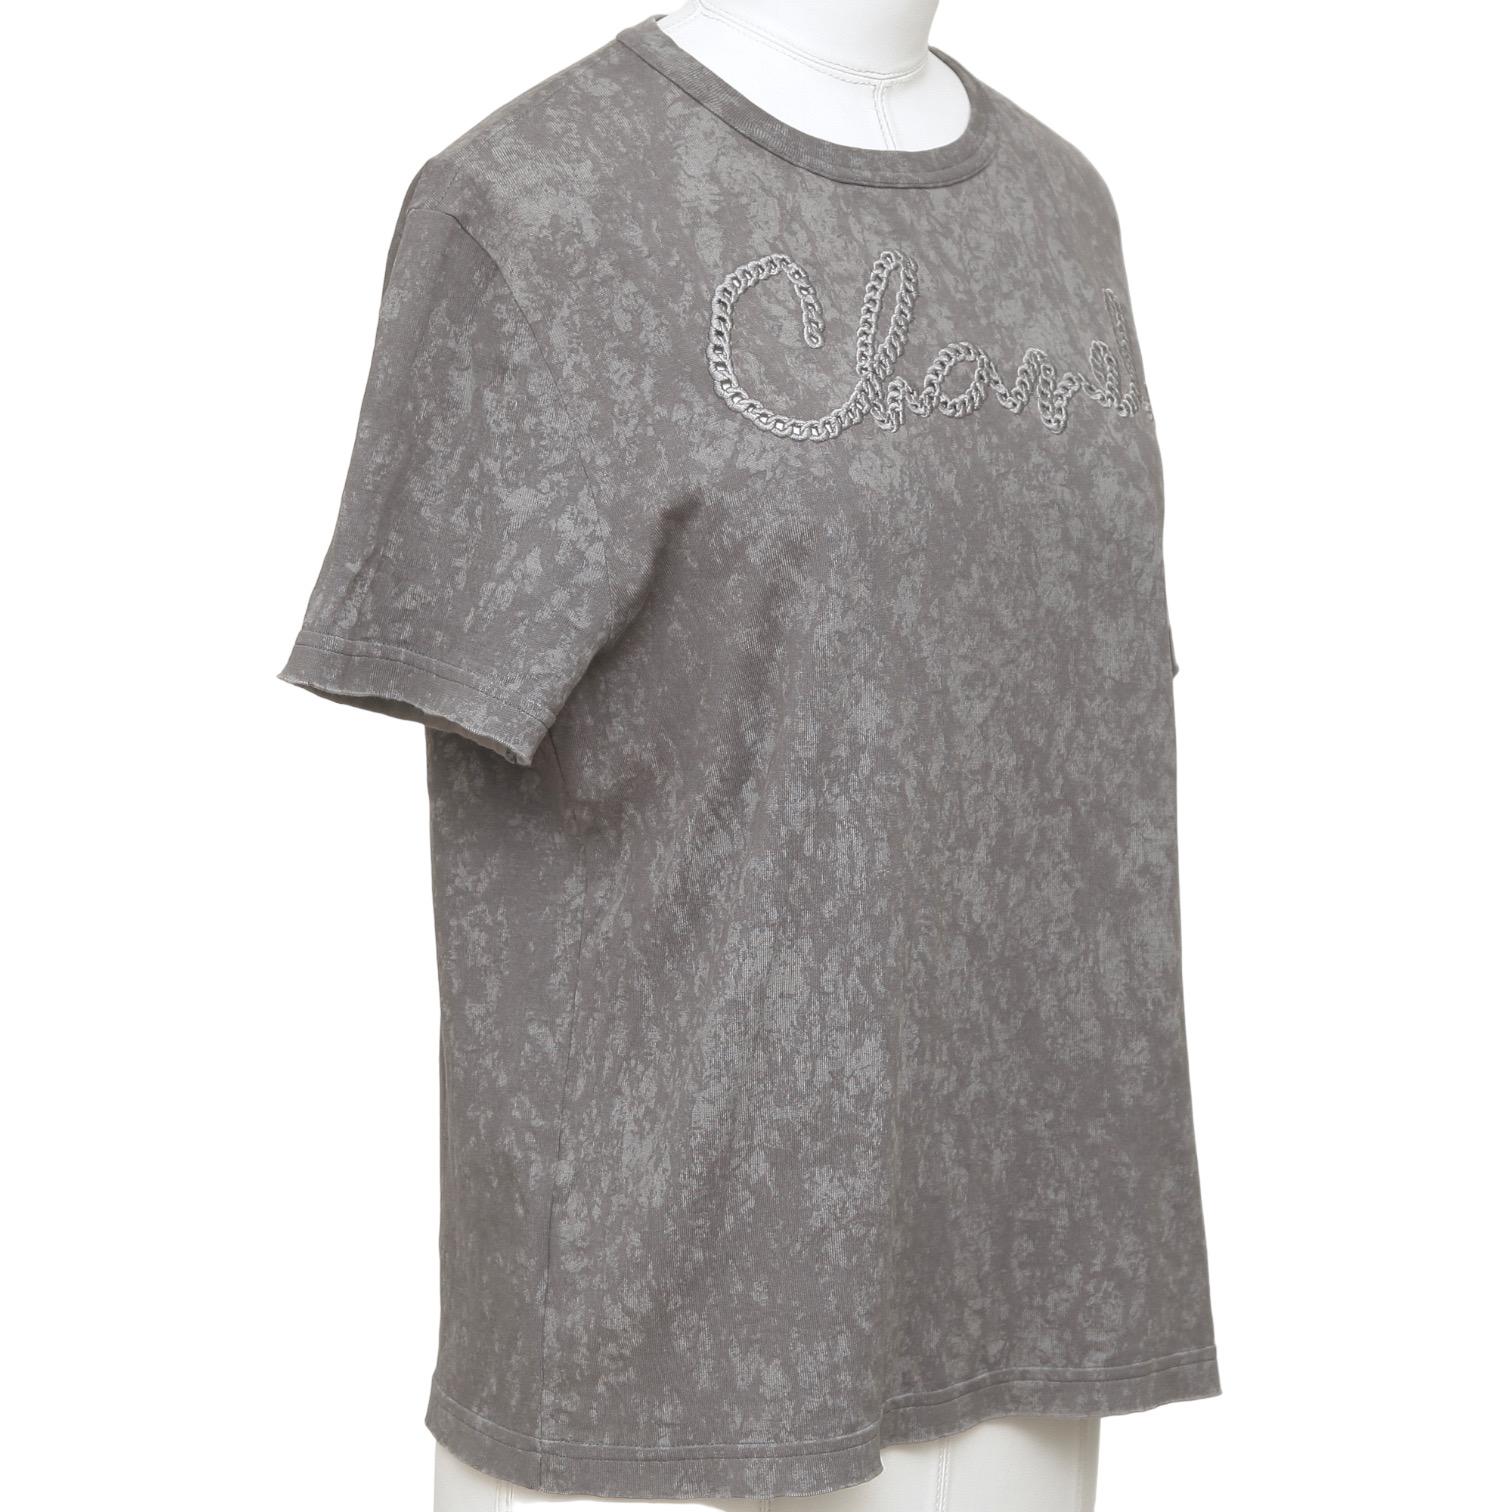 GUARANTEED AUTHENTIC CHANEL 2020 SIGNATURE GREY TIE-DYE T-SHIRT

Design:
- Grey color tie-dye design t shirt.
- Signature accent at front.
- Crew neck.
- Short sleeve.
- CC plaque at left shoulder.
- Slip on.

Size: 34/36

Material: 100%